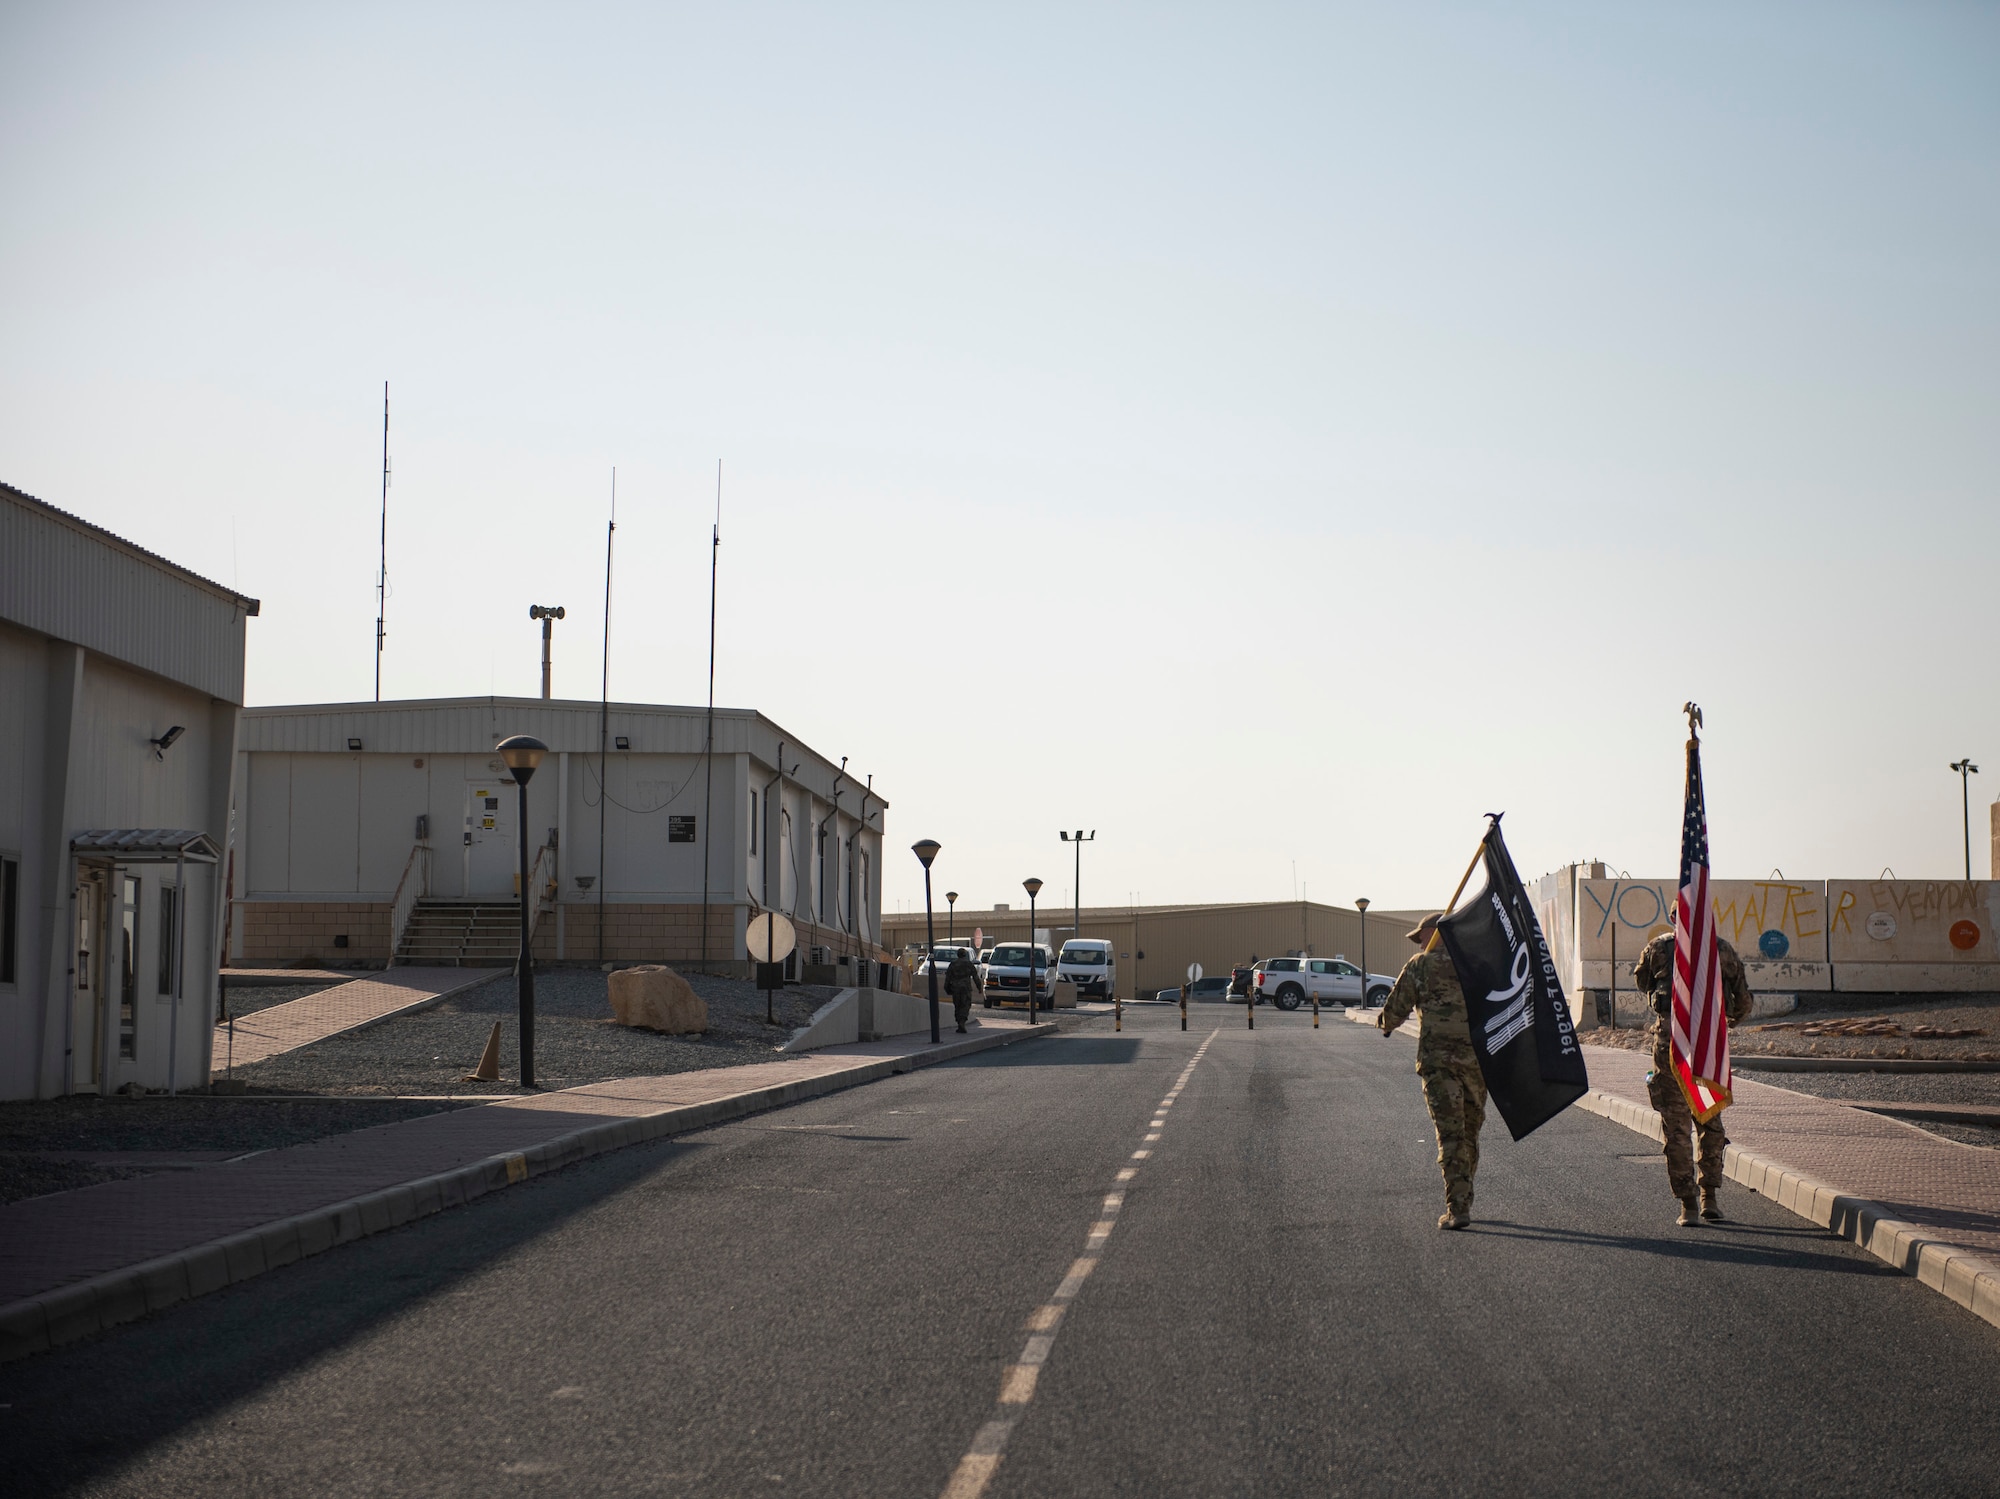 Staff Sgt. Aaron Watts, 386 Expeditionary Civil Engineer Squadron firefighter, marches along the side of a member of the 386 Expeditionary Security Forces Squadron at Ali Al Salem Air Base, Kuwaiti, 12 Sept. 2022 in remembrance of those lost on Sept. 11, 2001. Members from multiple branches of service and coalition teammates from throughout the world took part in the 24-hour march which started at 3:46 p.m. local time, 11 Sept 2022. (U.S. Air Force photo by Senior Master Sgt. David Salanitri)